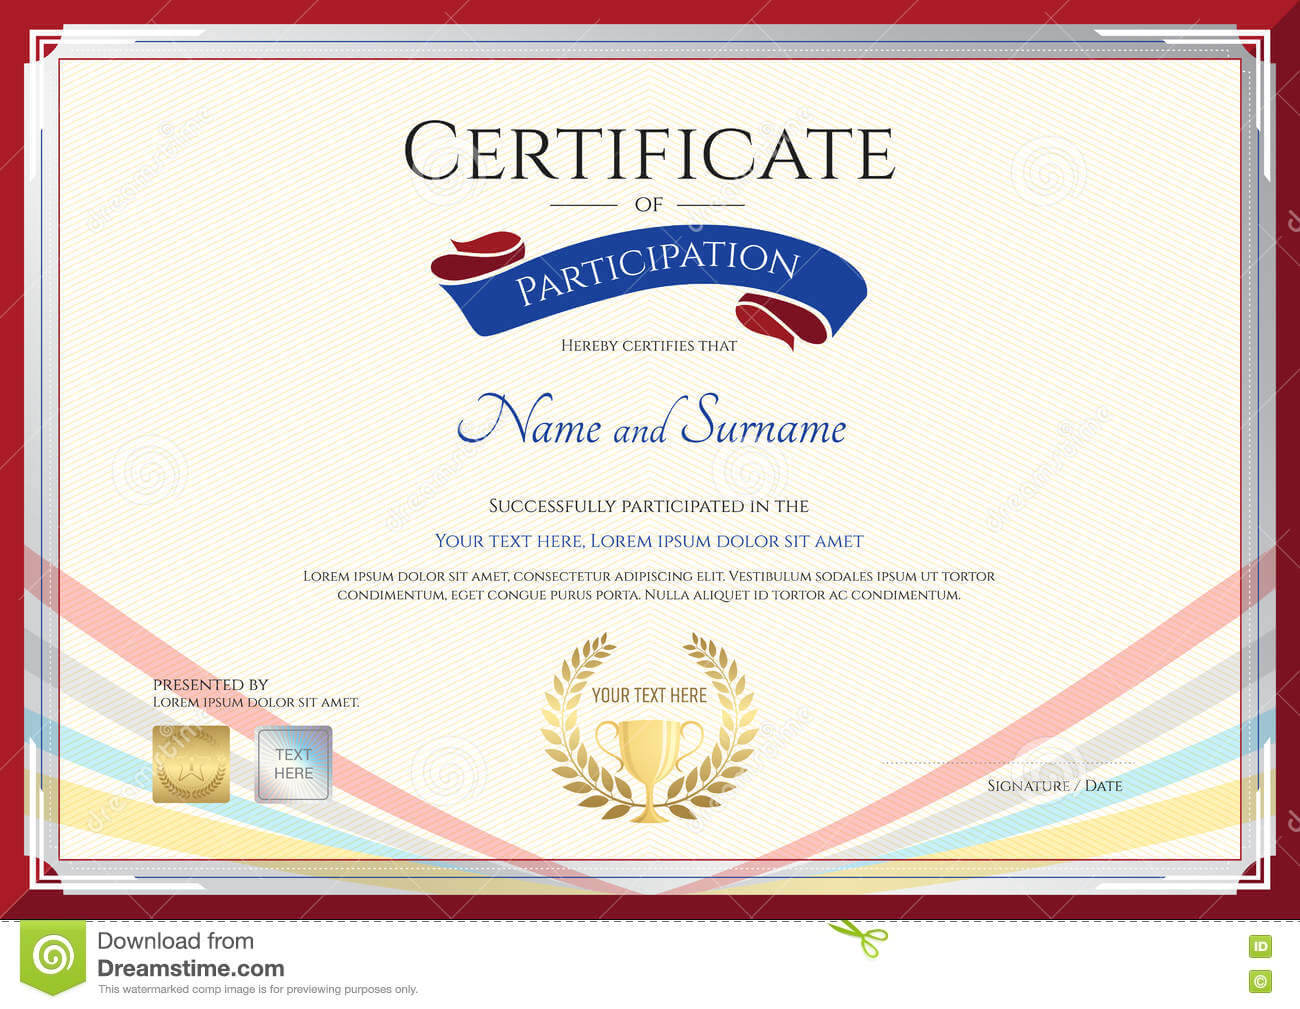 Certificate Template For Achievement, Appreciation Or Within International Conference Certificate Templates